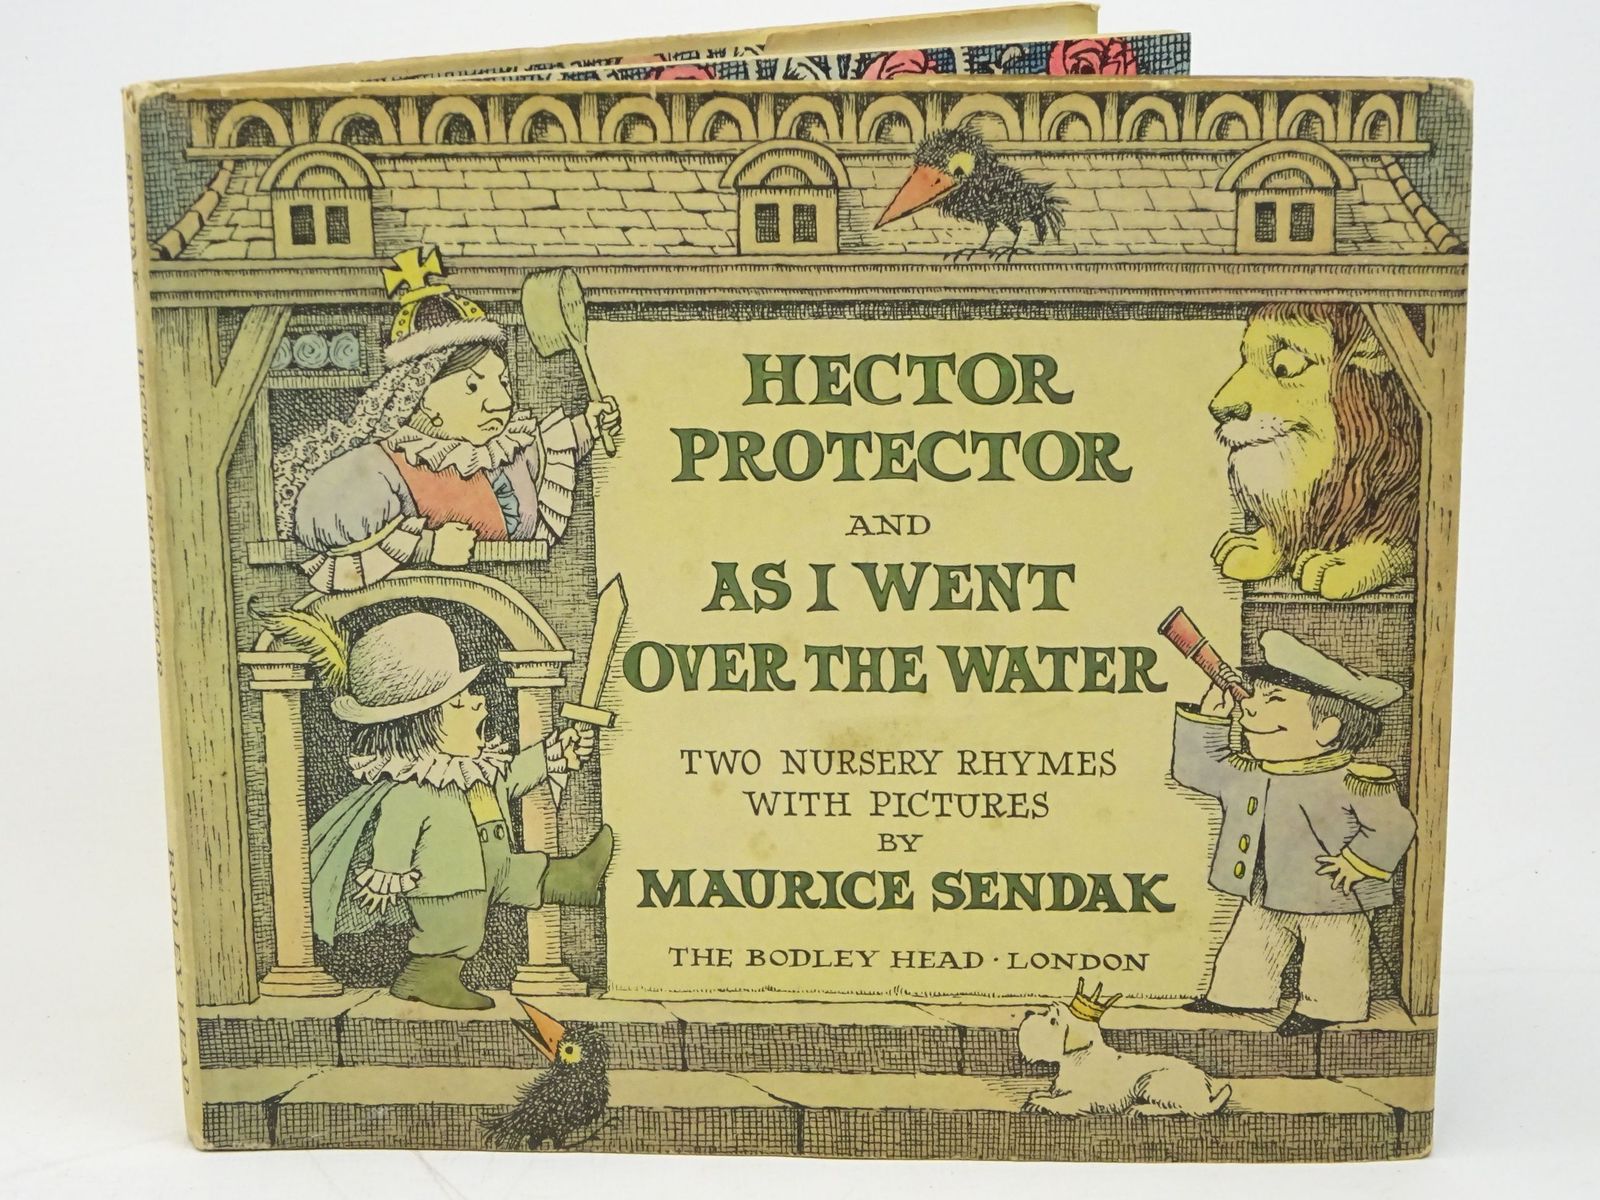 Photo of HECTOR PROTECTOR AND AS I WENT OVER THE WATER written by Sendak, Maurice illustrated by Sendak, Maurice published by The Bodley Head (STOCK CODE: 1318026)  for sale by Stella & Rose's Books